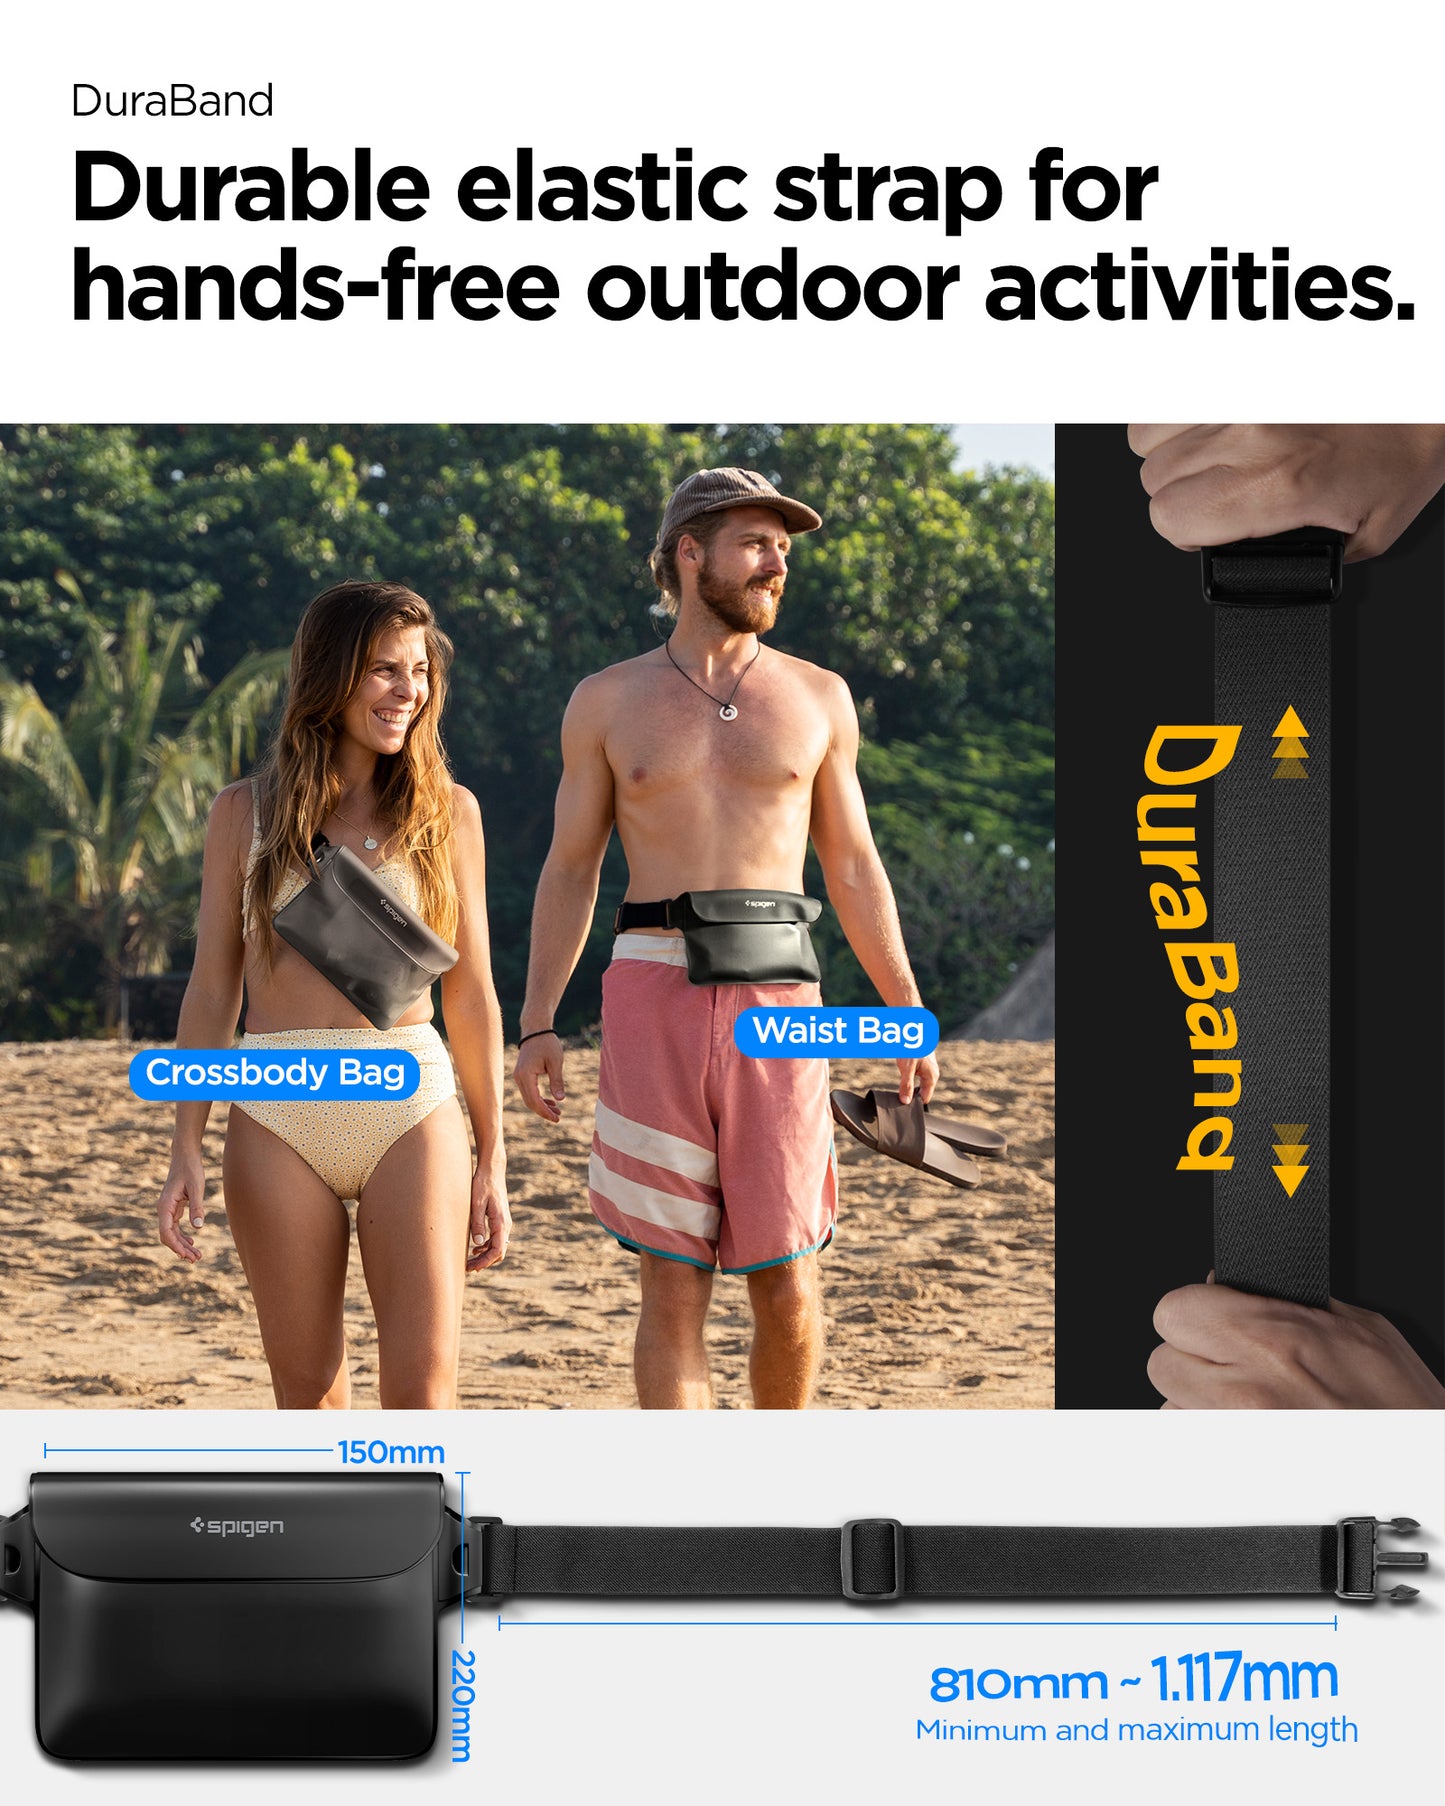 AMP04532 - AquaShield Waterproof Waist Bag A620 in Black showing the durable elastic strap for hands-free outdoor activities, with 810mm-1.117mm length